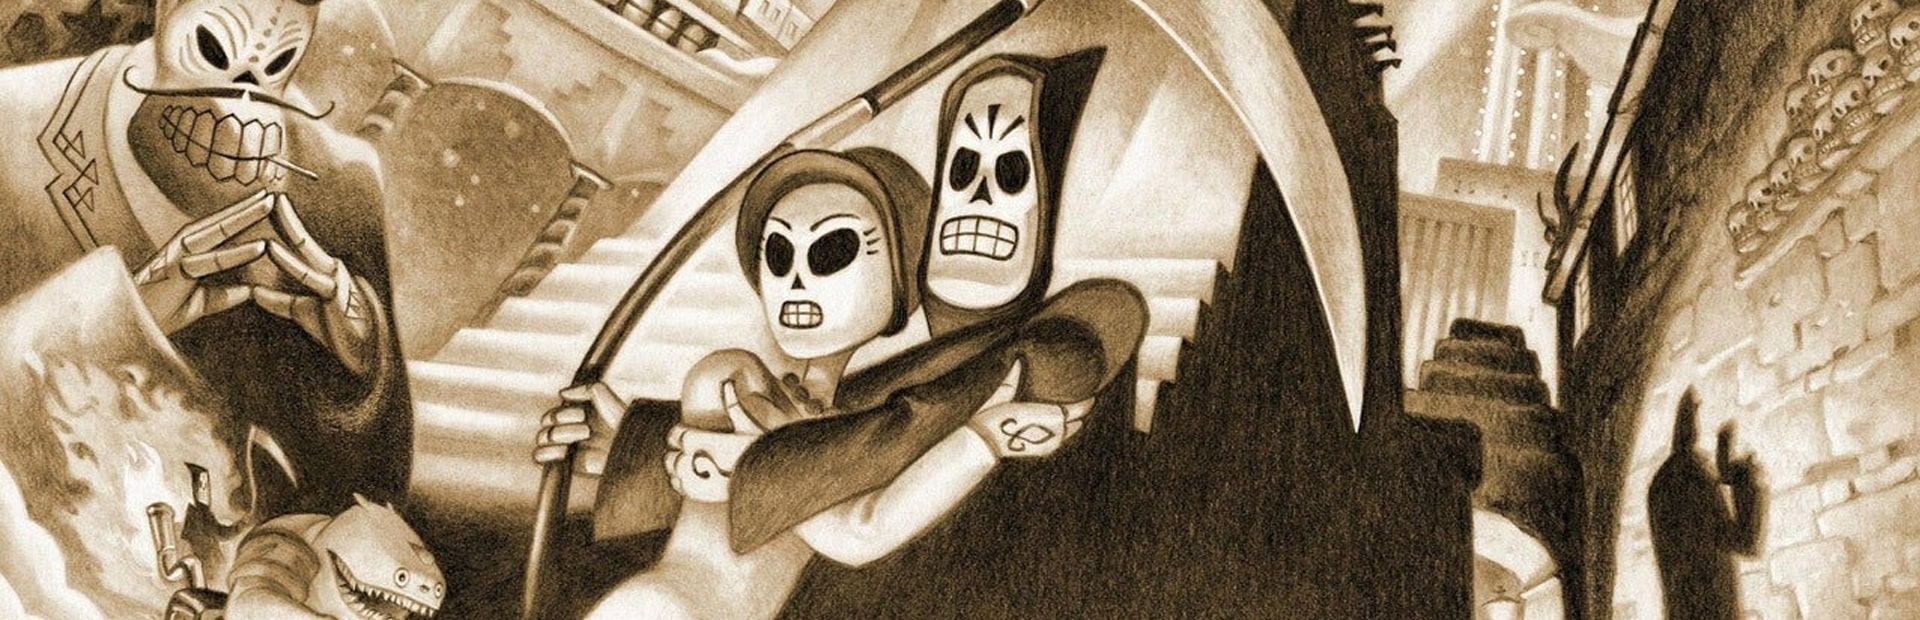 Grim Fandango Remastered Review: A Timeless Classic Reborn